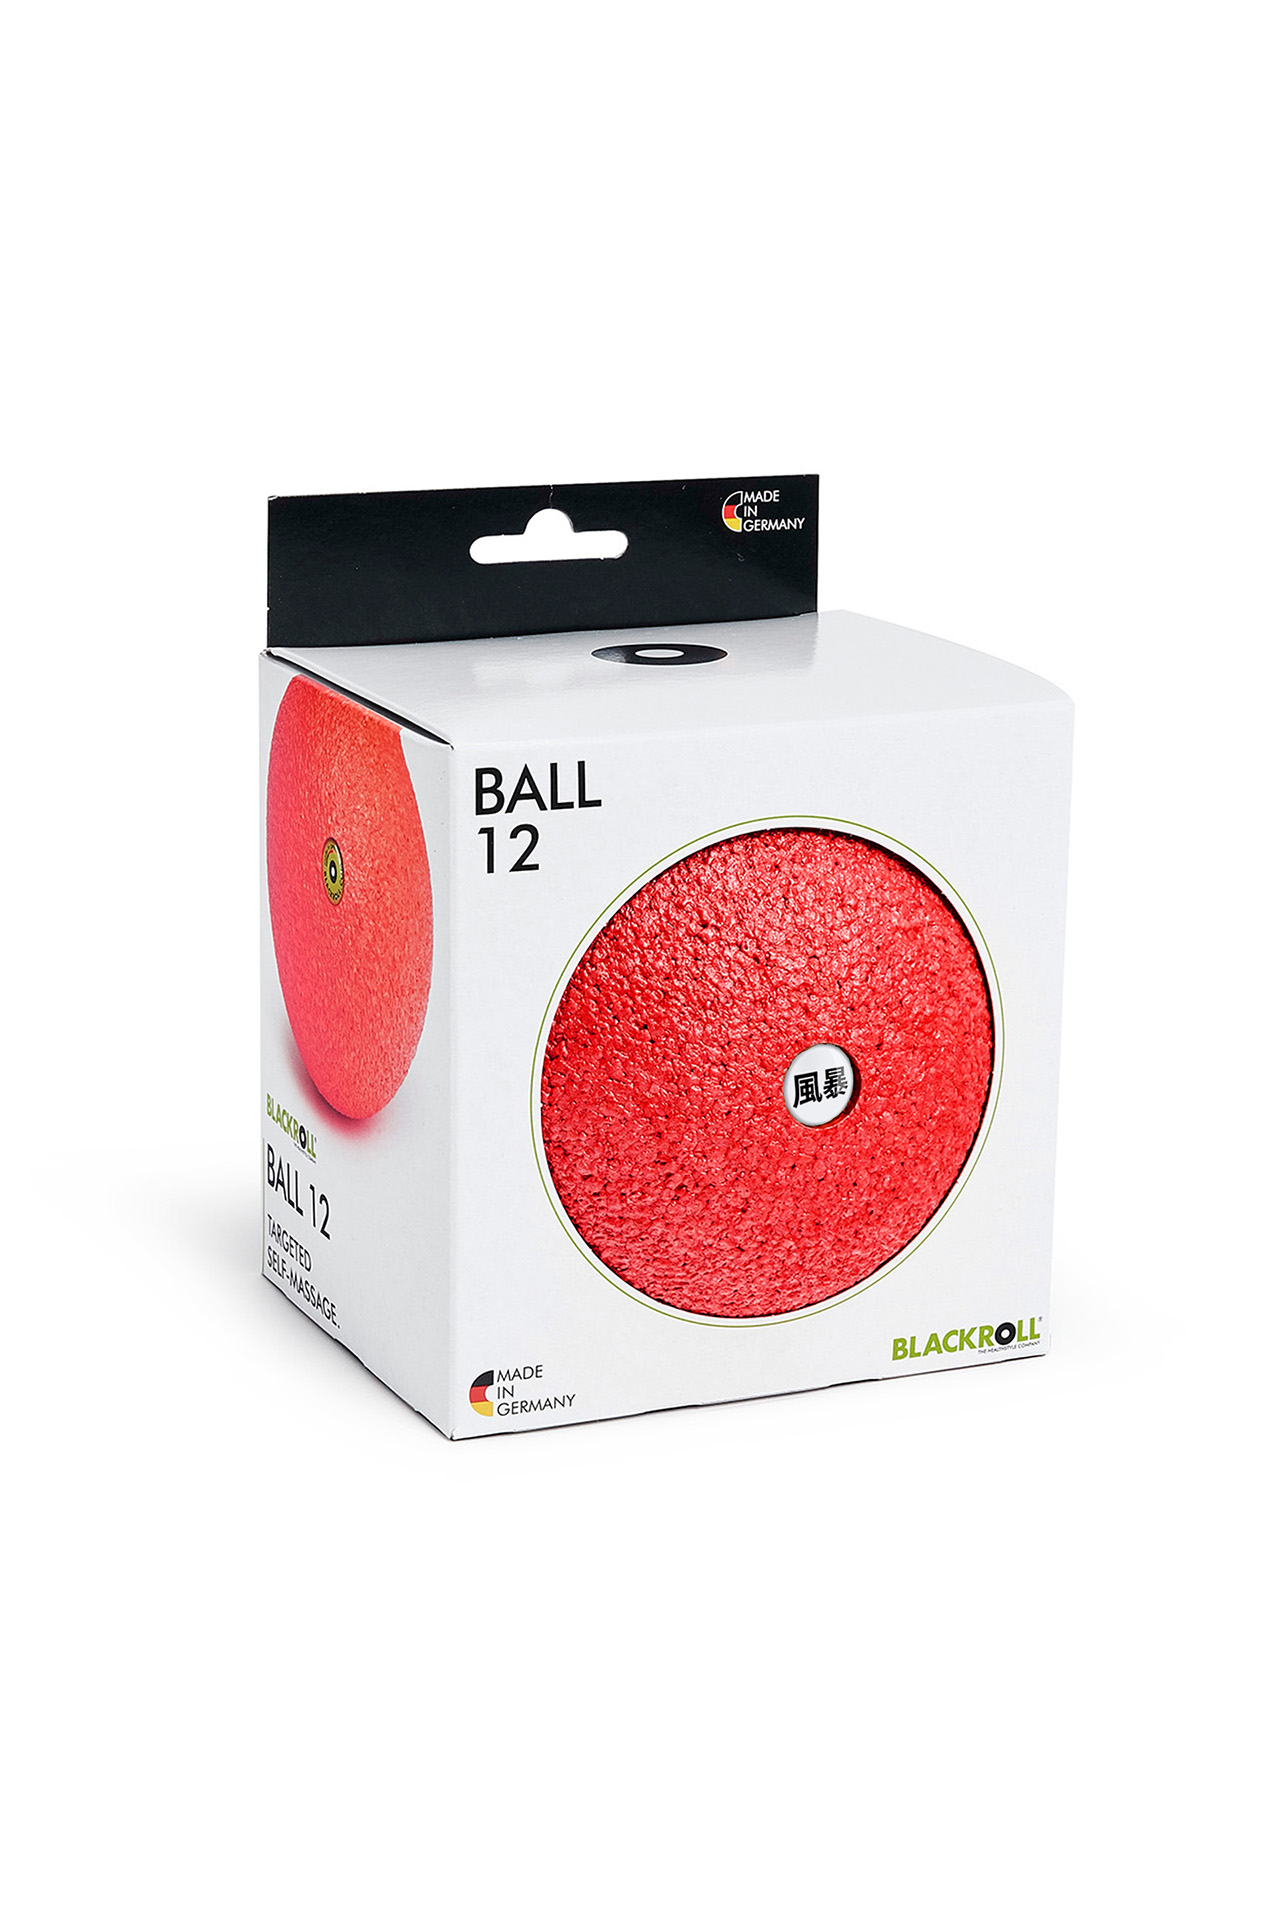 blackroll ball 12cm fengbao kung fu shop wien 1080 verpackung chinesisch rot red